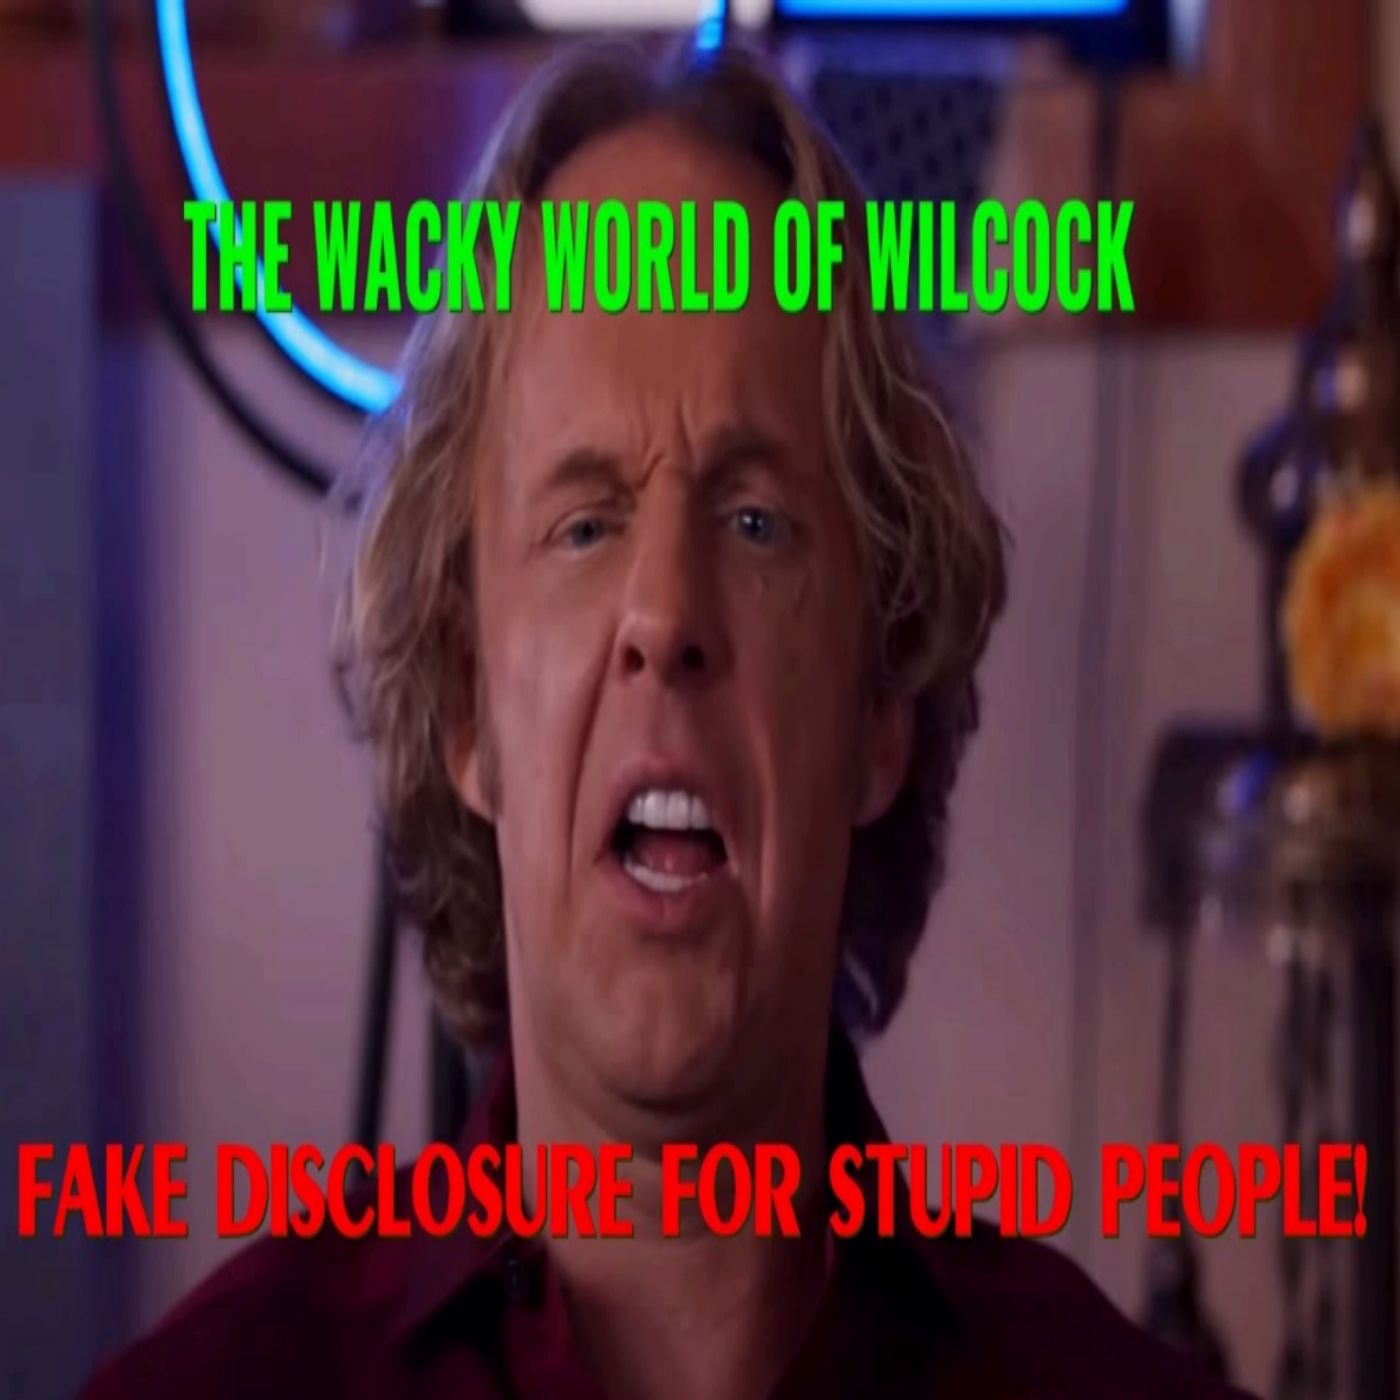 The WACKY world of WILCOCK! Fake disclosure for STUPID people!